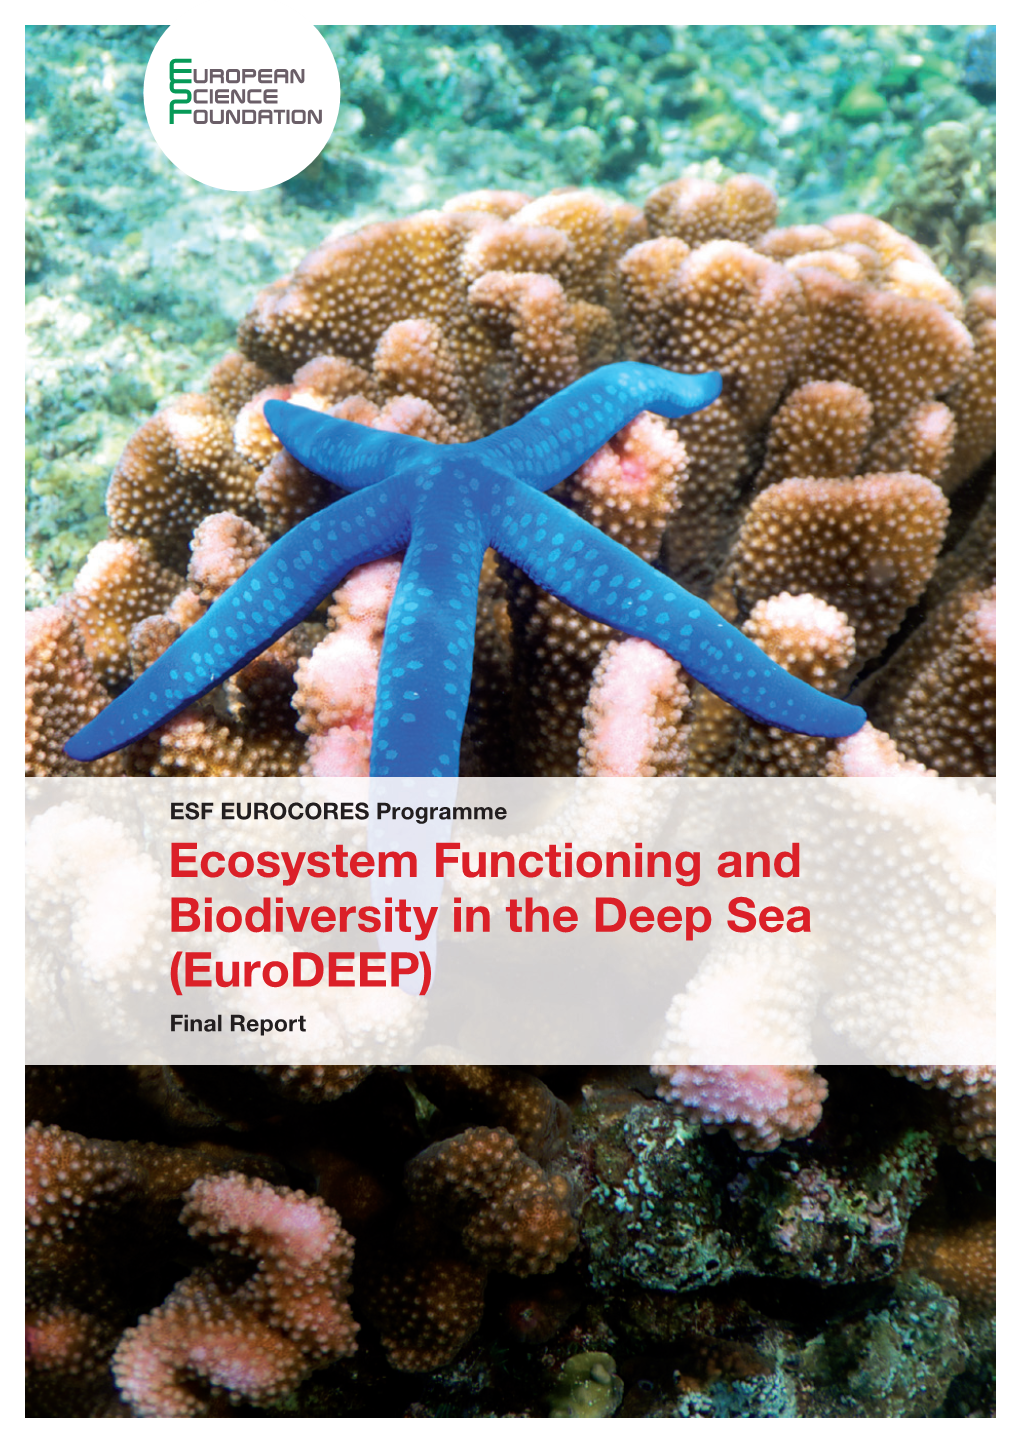 Ecosystem Functioning and Biodiversity in the Deep Sea